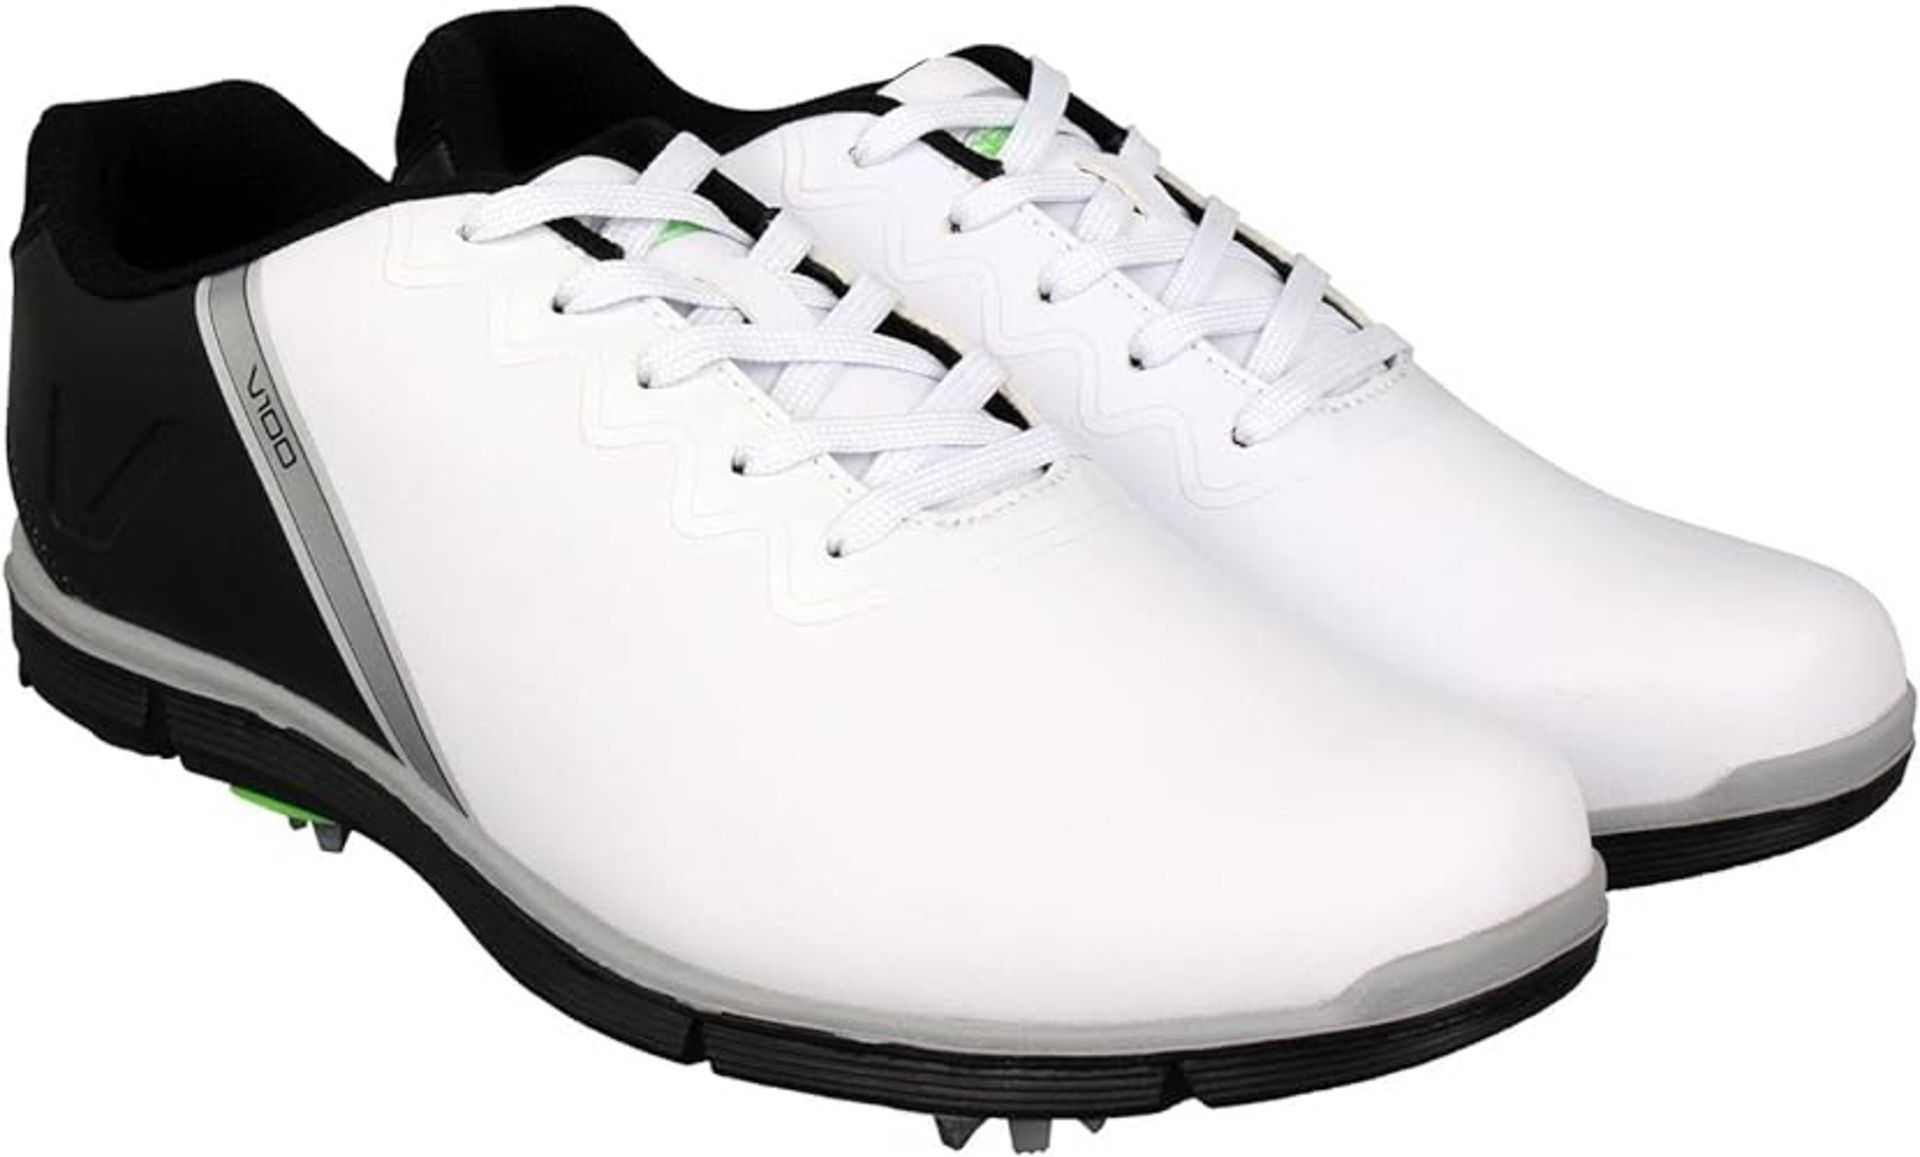 2 X BRAND NEW PAIRS OF SLAZENGER V100 PROFESSIONAL GOLF SHOES SIZE 9 RRP £89 EACH S1RA - Image 3 of 3